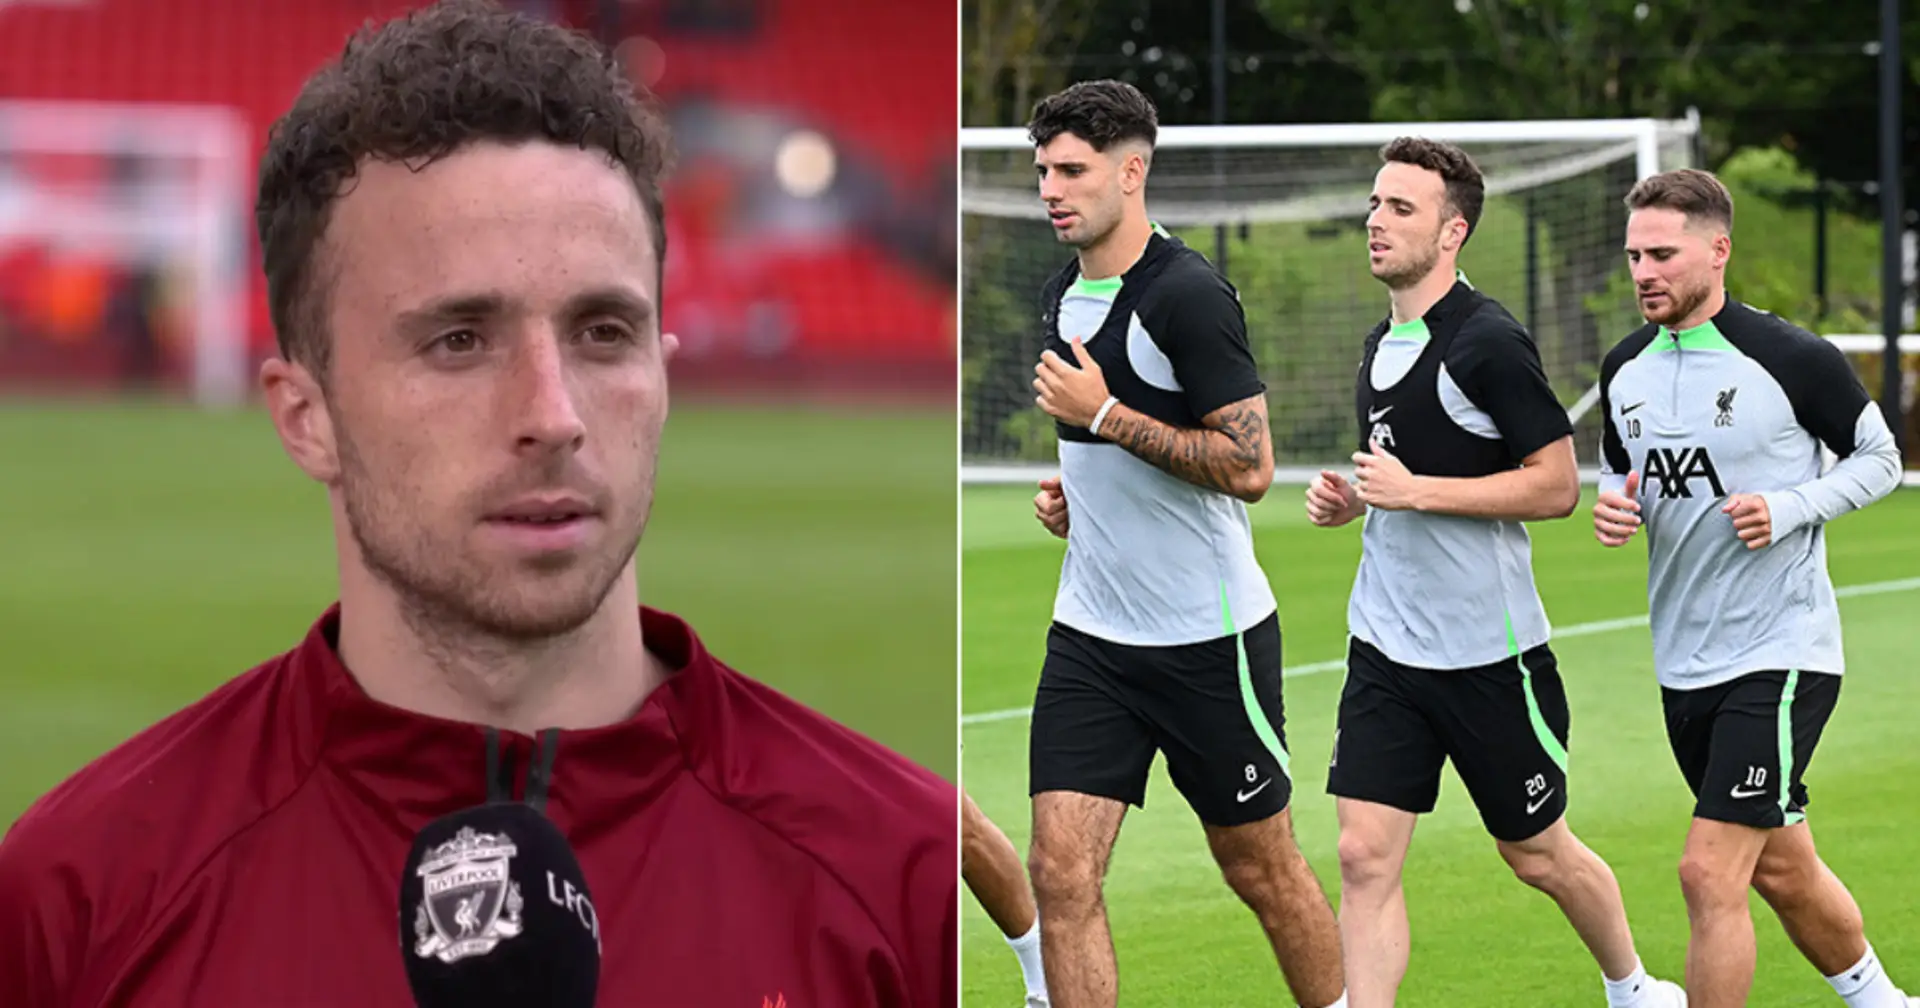 'I could see the quality': Jota on his first impressions of Szoboszlai and Mac Allister